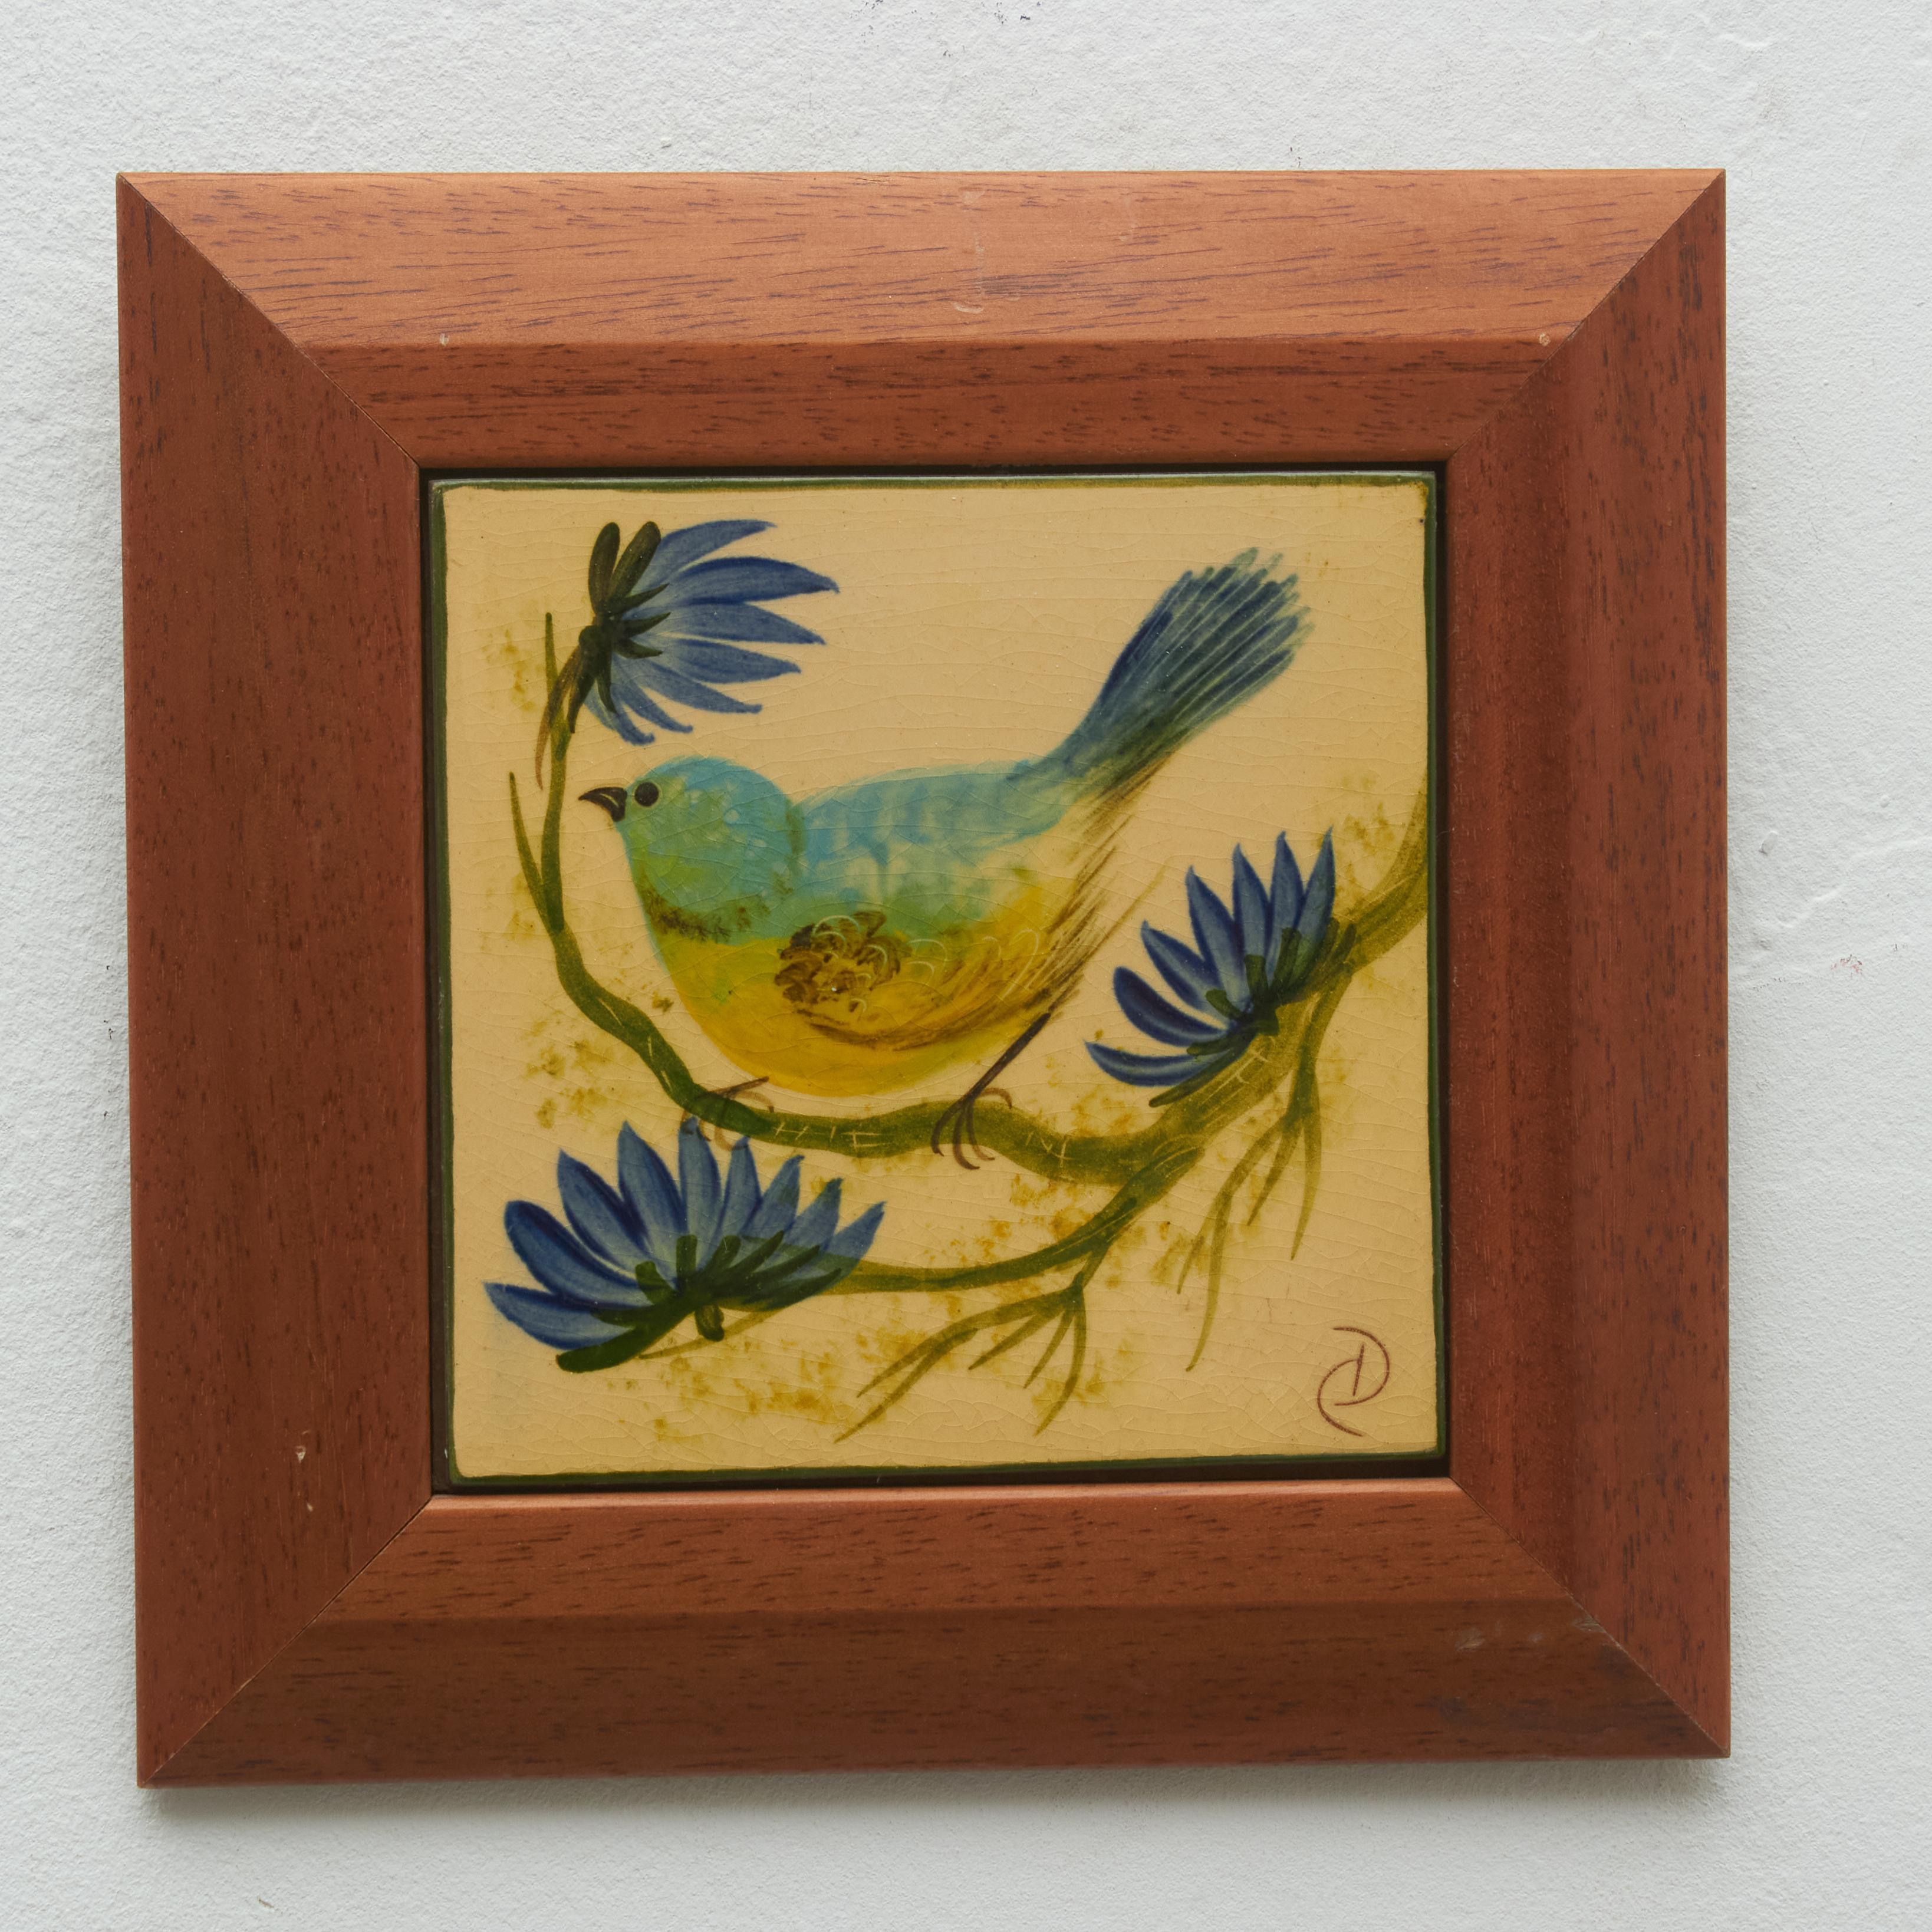 Ceramic hand painted artwork of a bird, designed by Catalan artist Diaz Costa, circa 1960.
Framed. Signed.

In original condition, with minor wear consistent of age and use, preserving a beautiul patina.

Important information regarding color(s) of